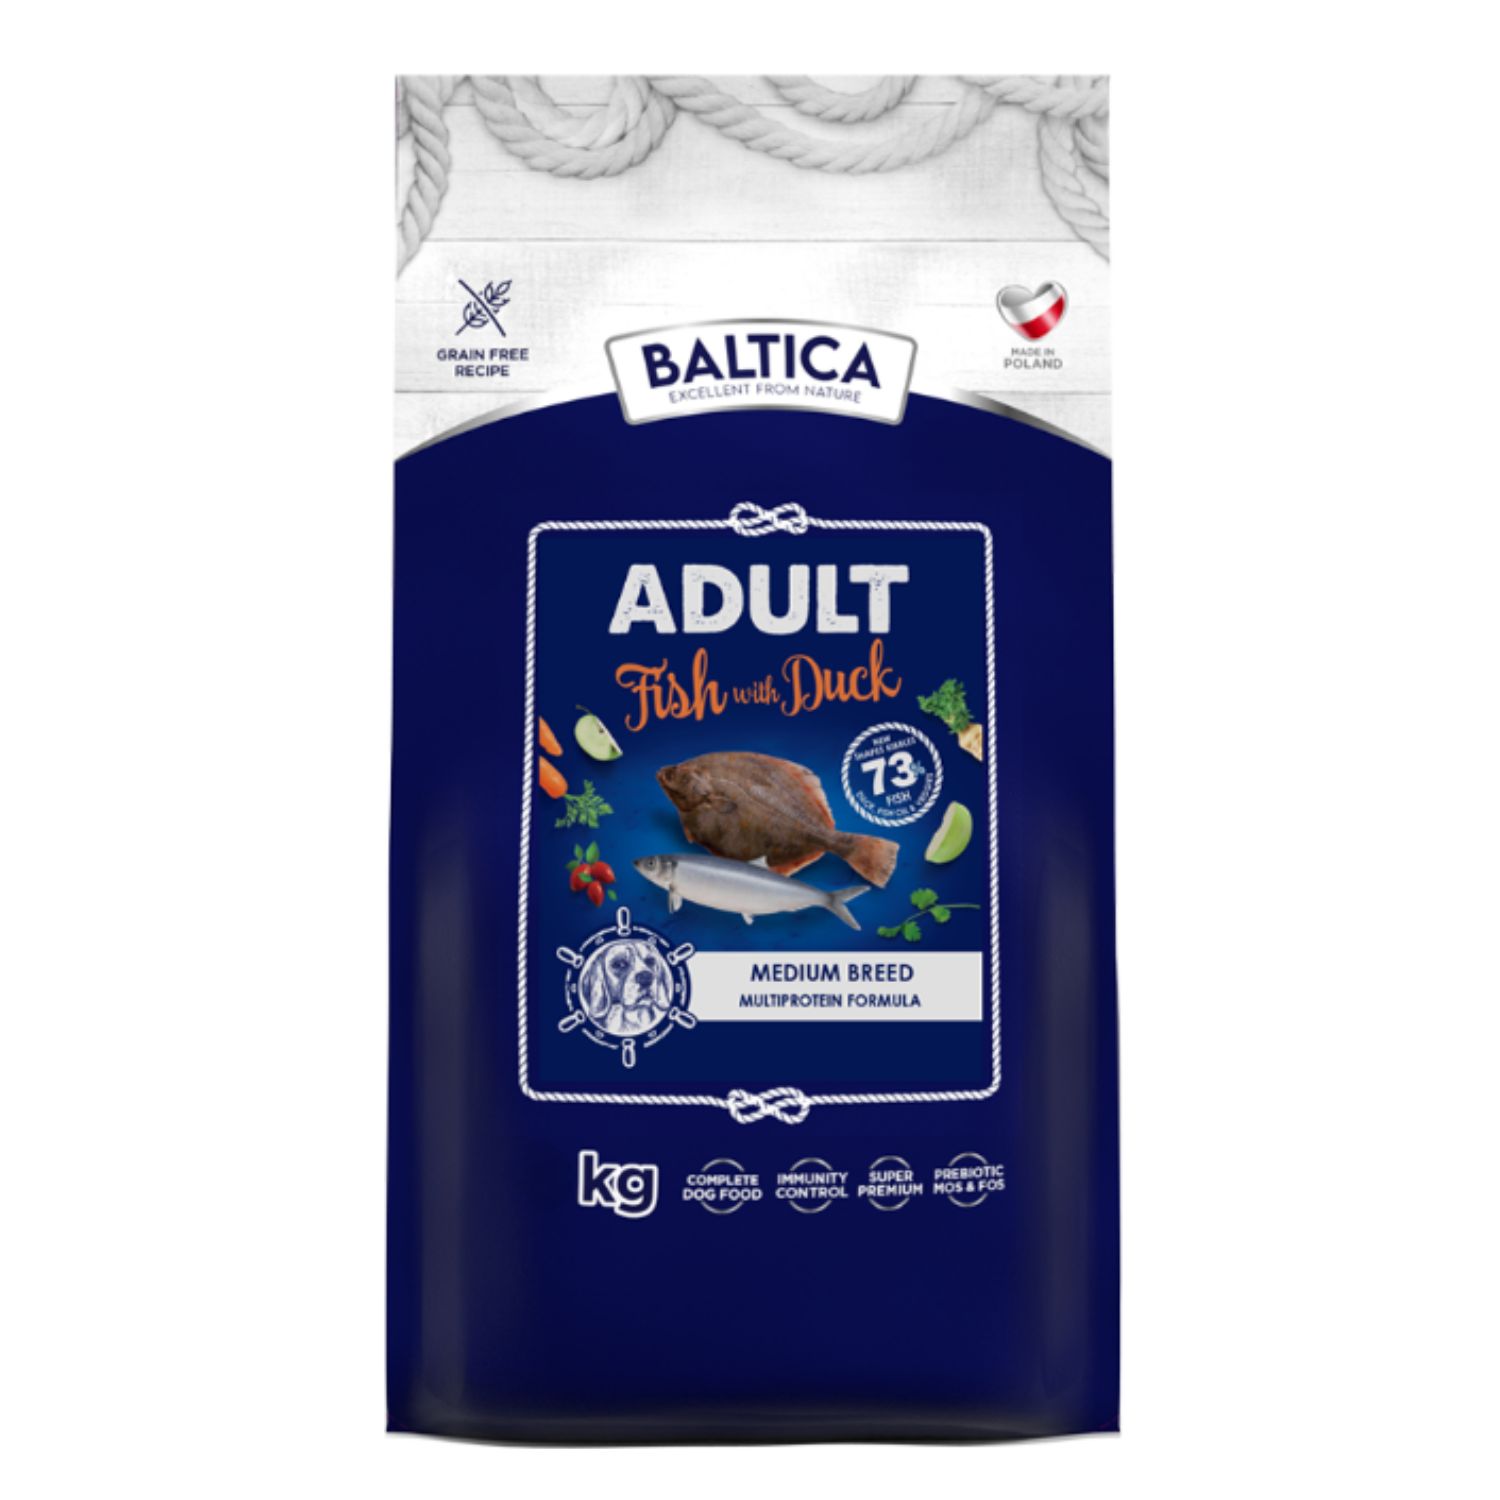 Baltica Adult Baltic Fish with Duck M